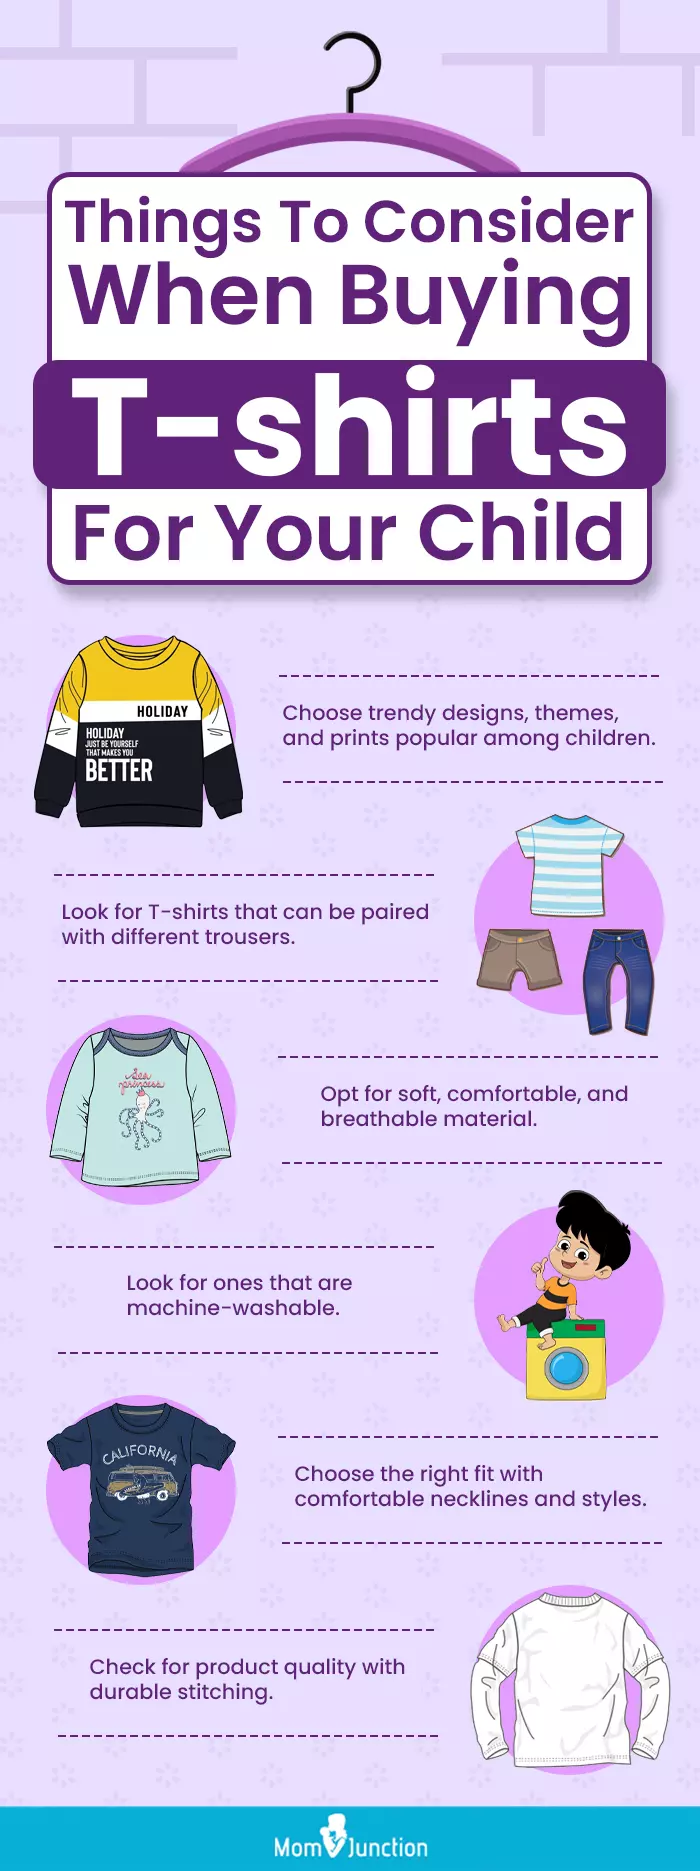 Things To Consider When Buying T shirts For Your Child (infographic)